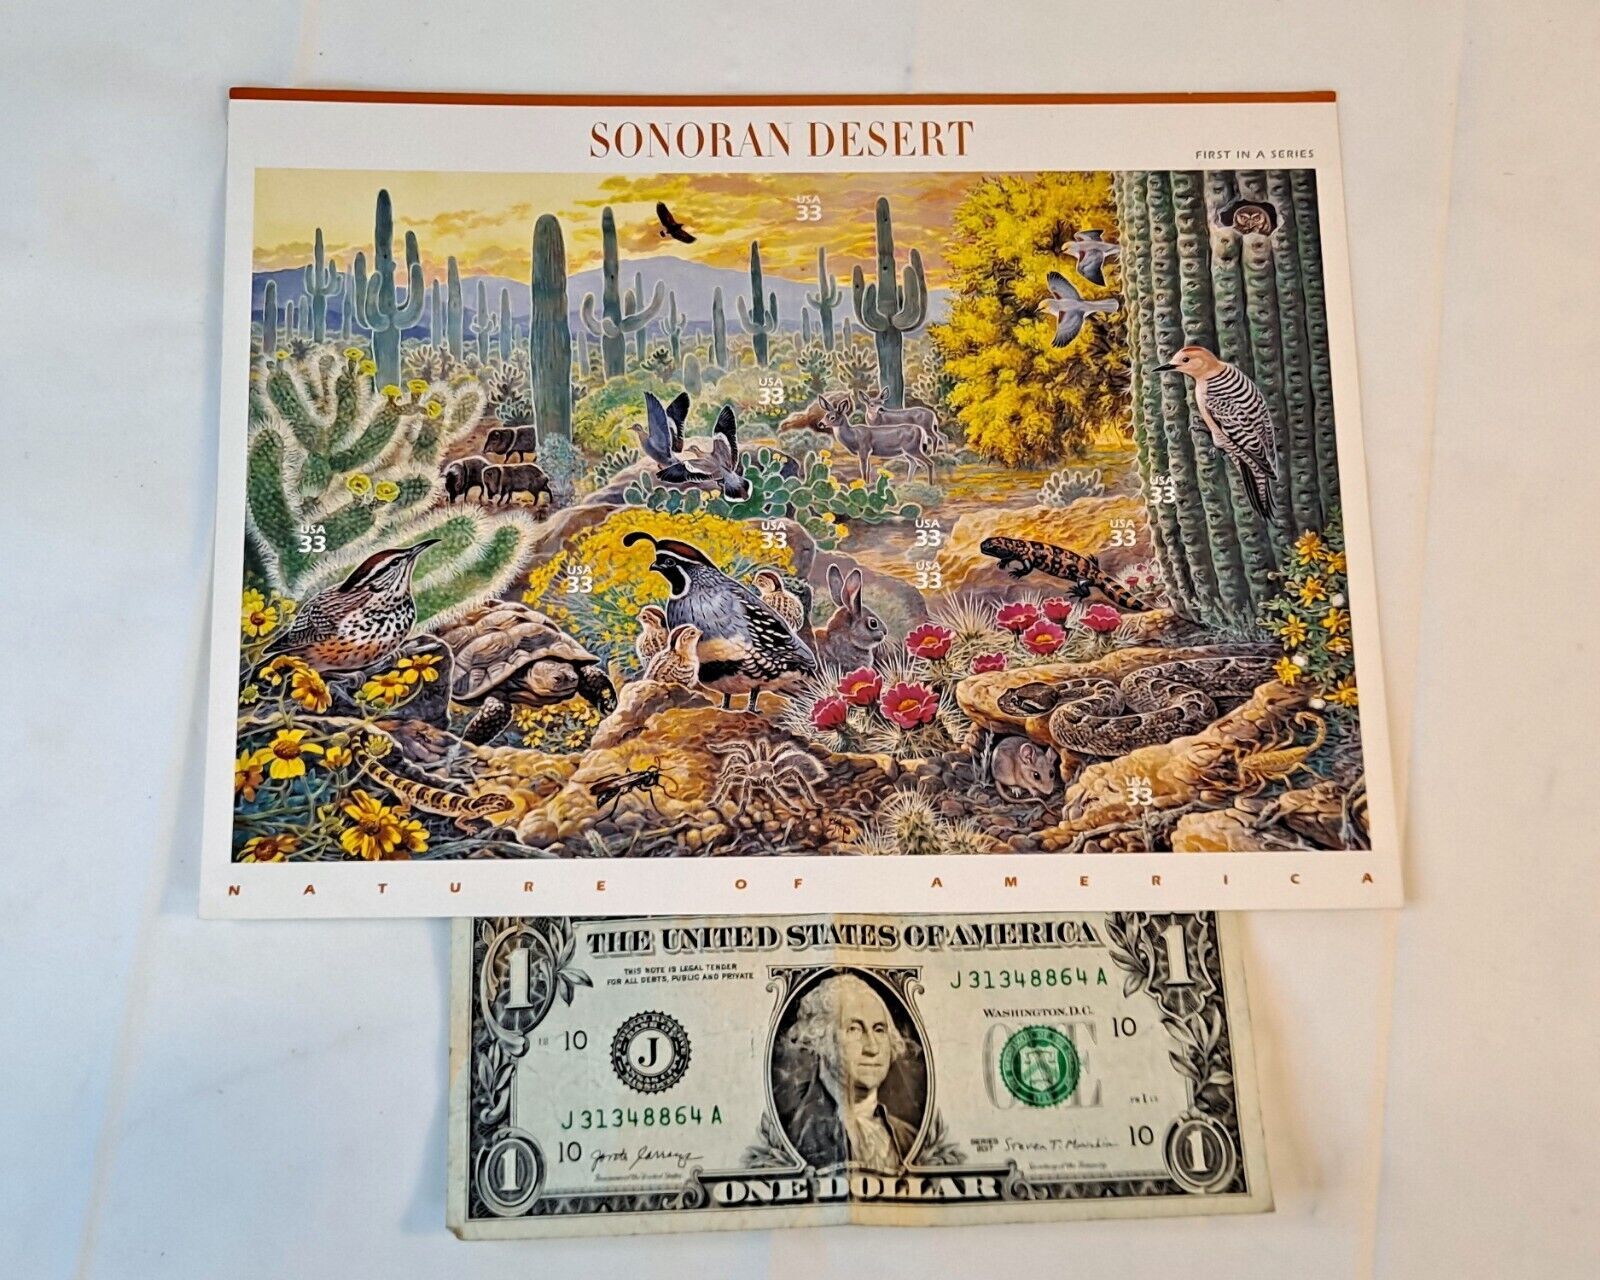 Primary image for Sonoran Desert USA Postage Stamps (1999 1st Sheet Issued in Series)